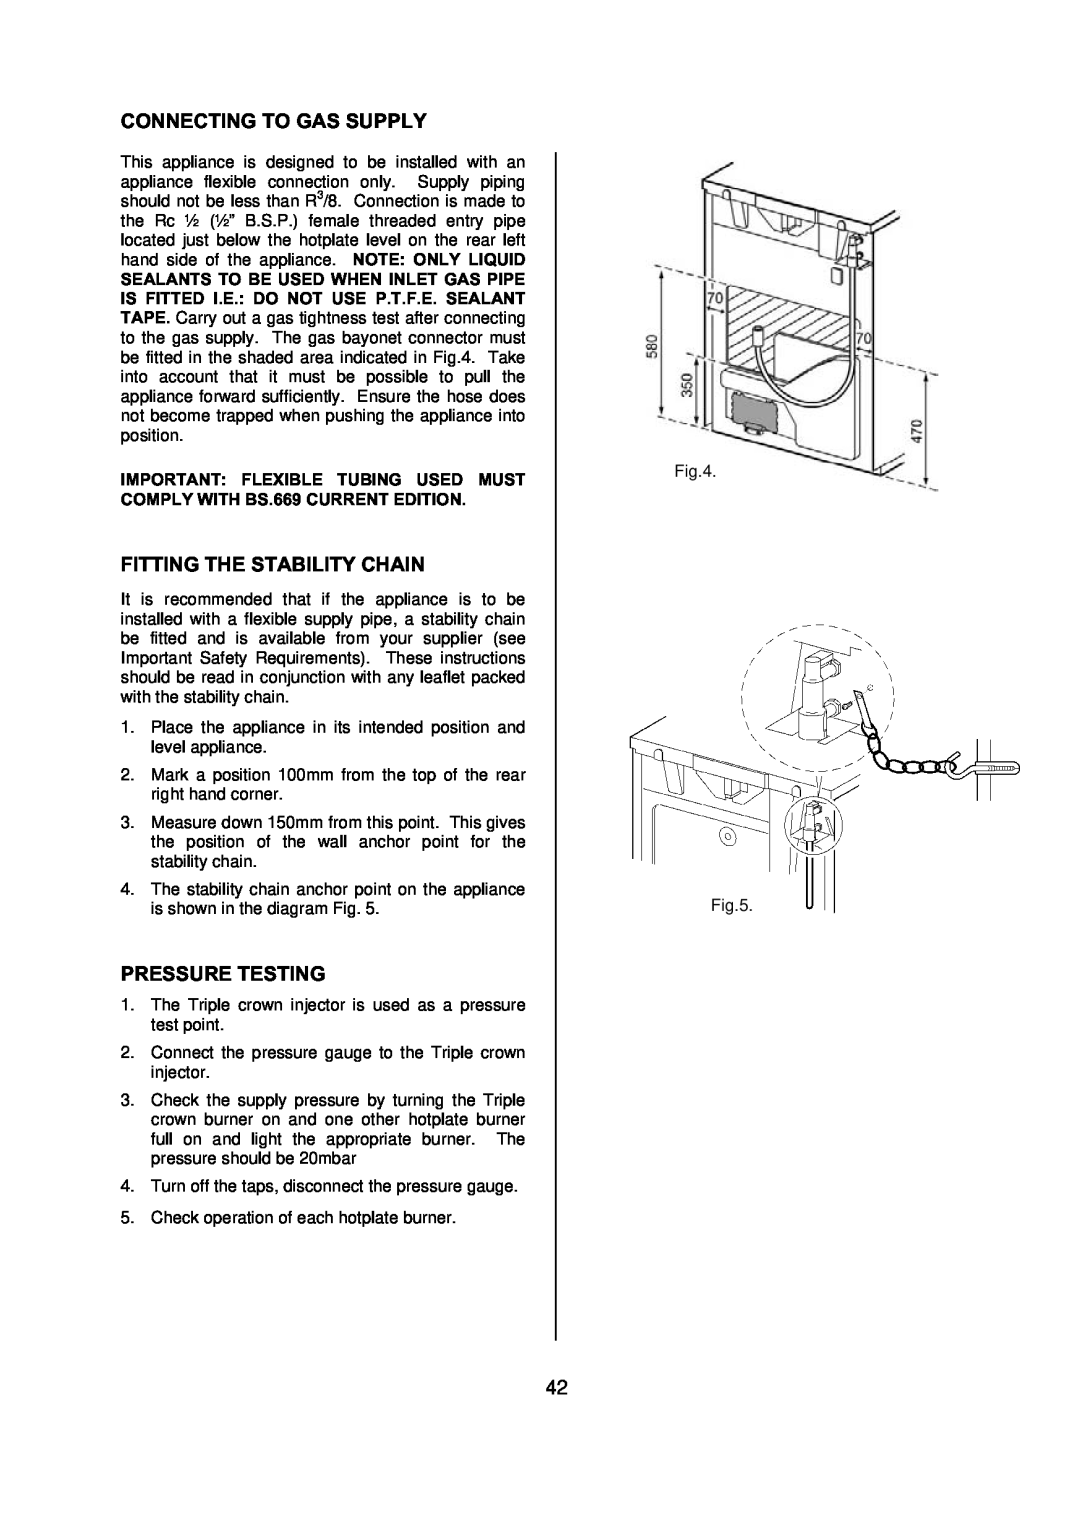 Electrolux D77000 user manual Connecting To Gas Supply, Fitting The Stability Chain, Pressure Testing 